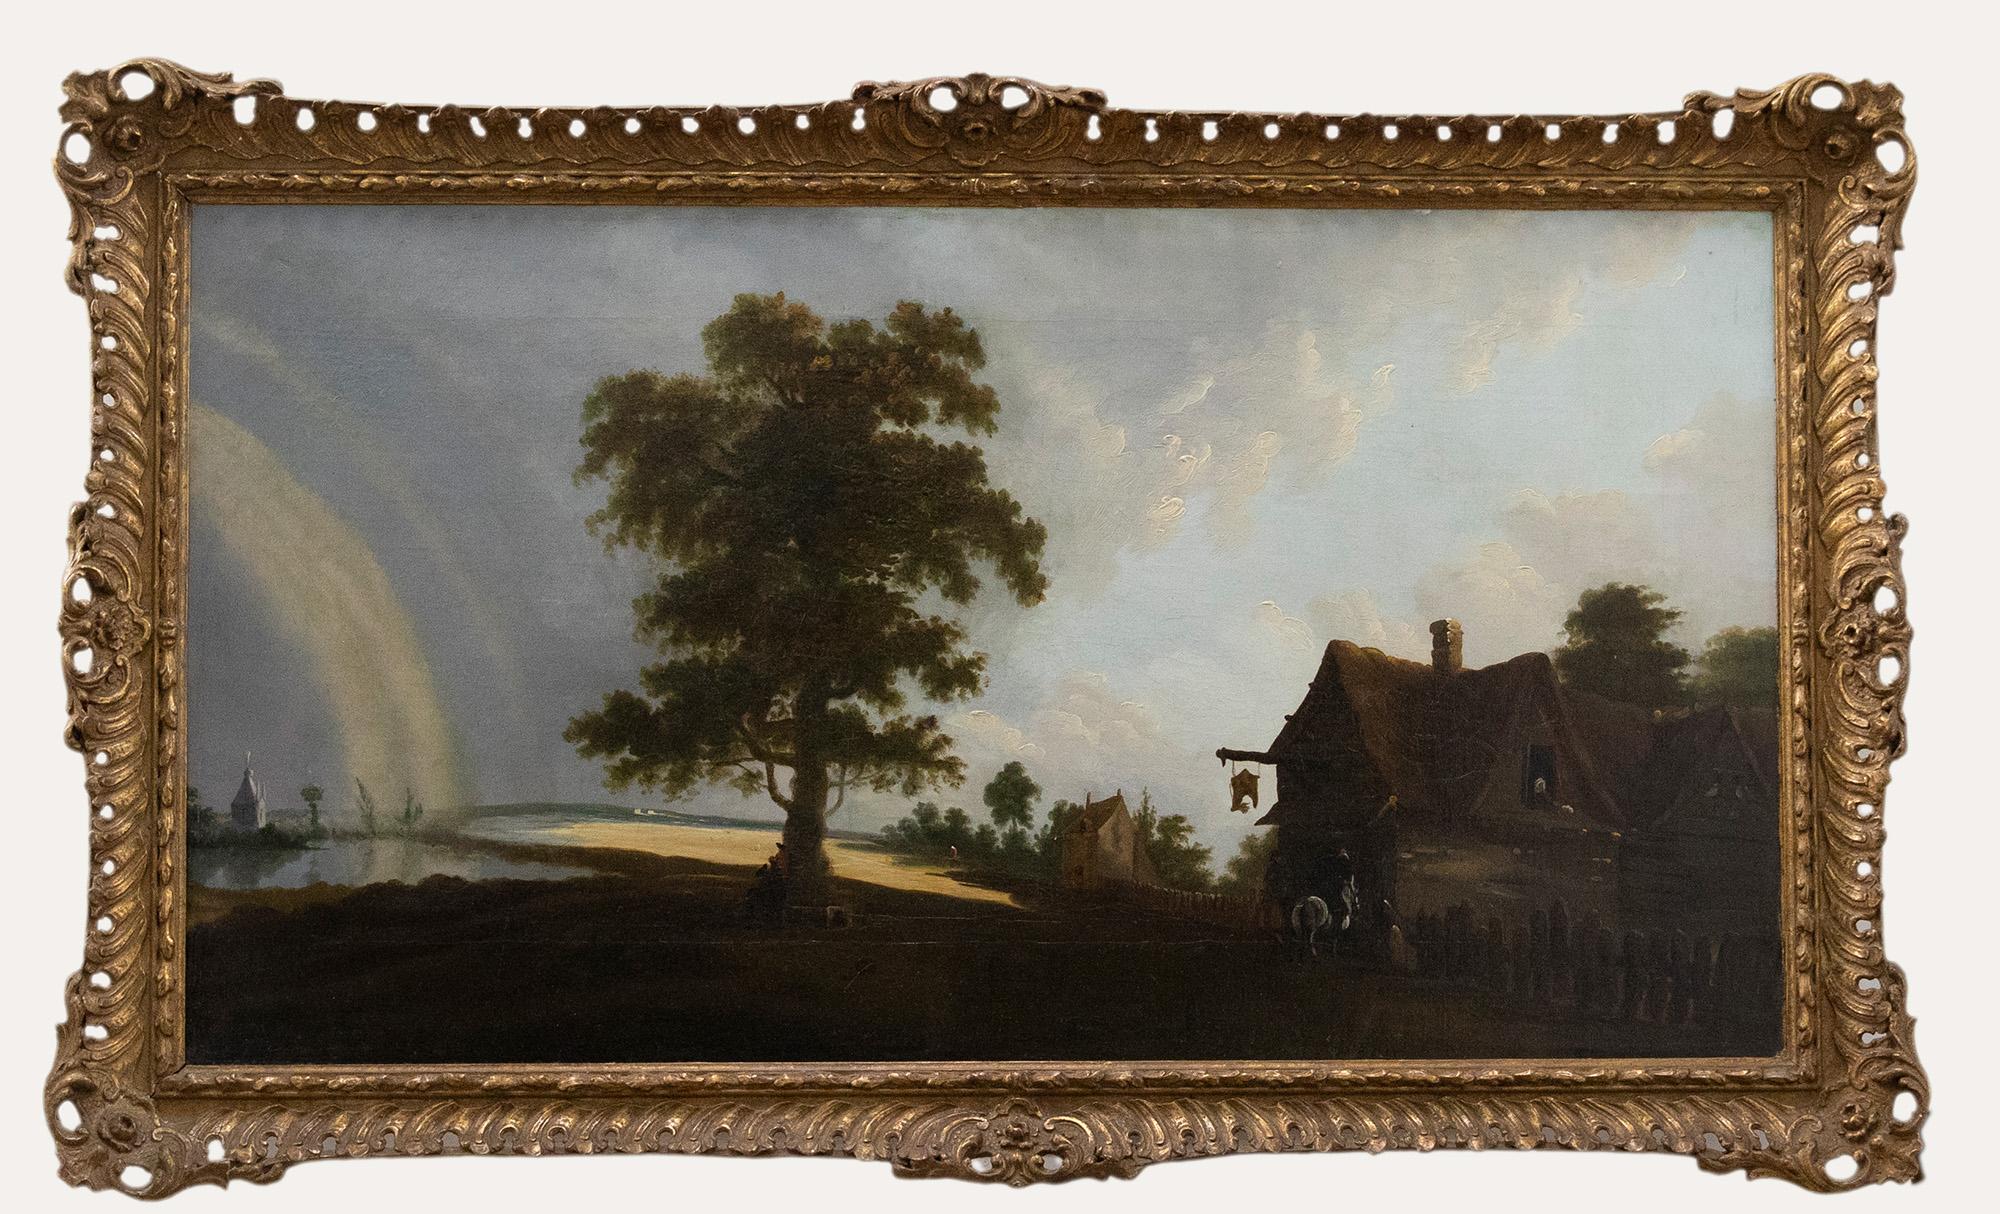 A delightful English School oil study depicting two figures on horseback arriving at an inn. The vast landscape in the background stretches out across an estuary. A rainbow stretches over the left side of the scene. The style of the scene shows